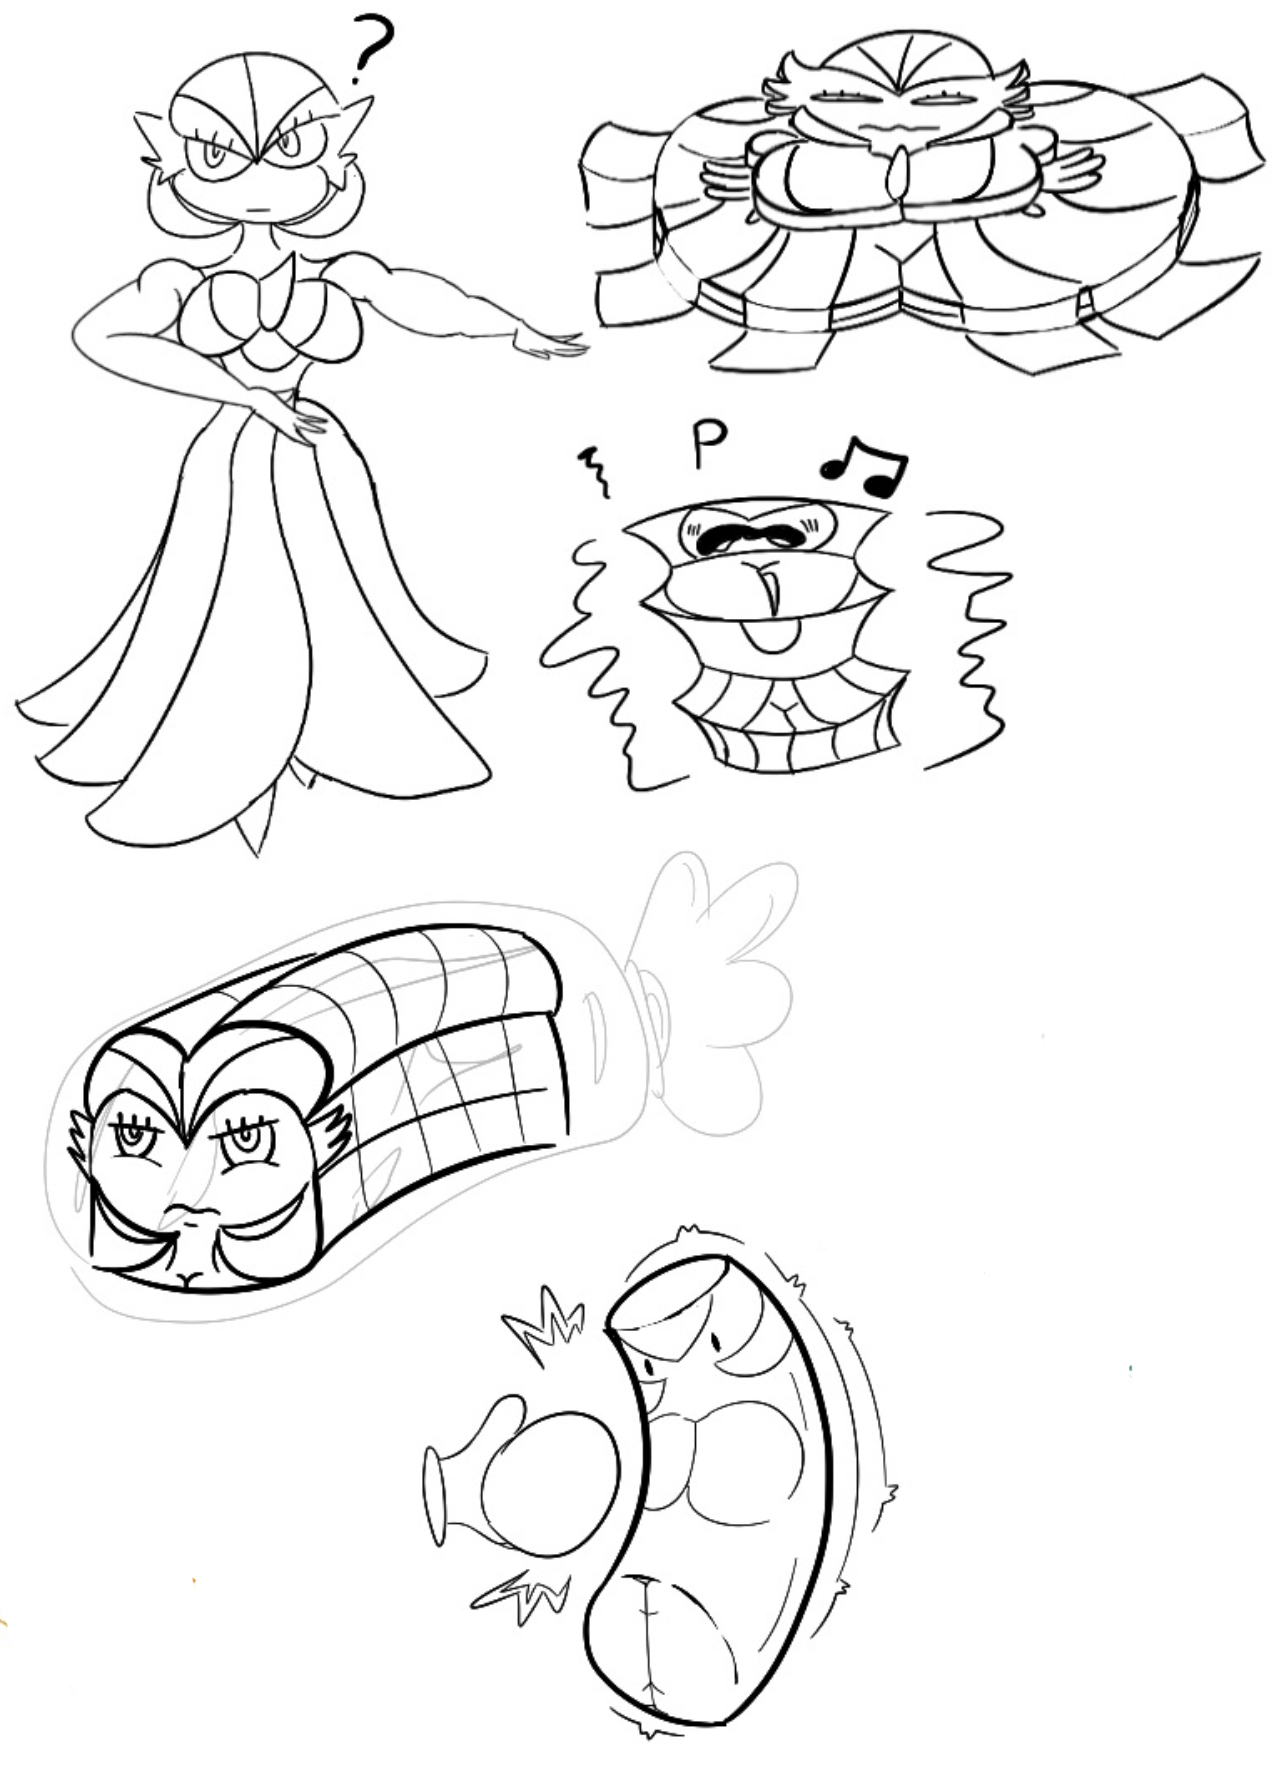 paper mario the thousand year door coloring pages